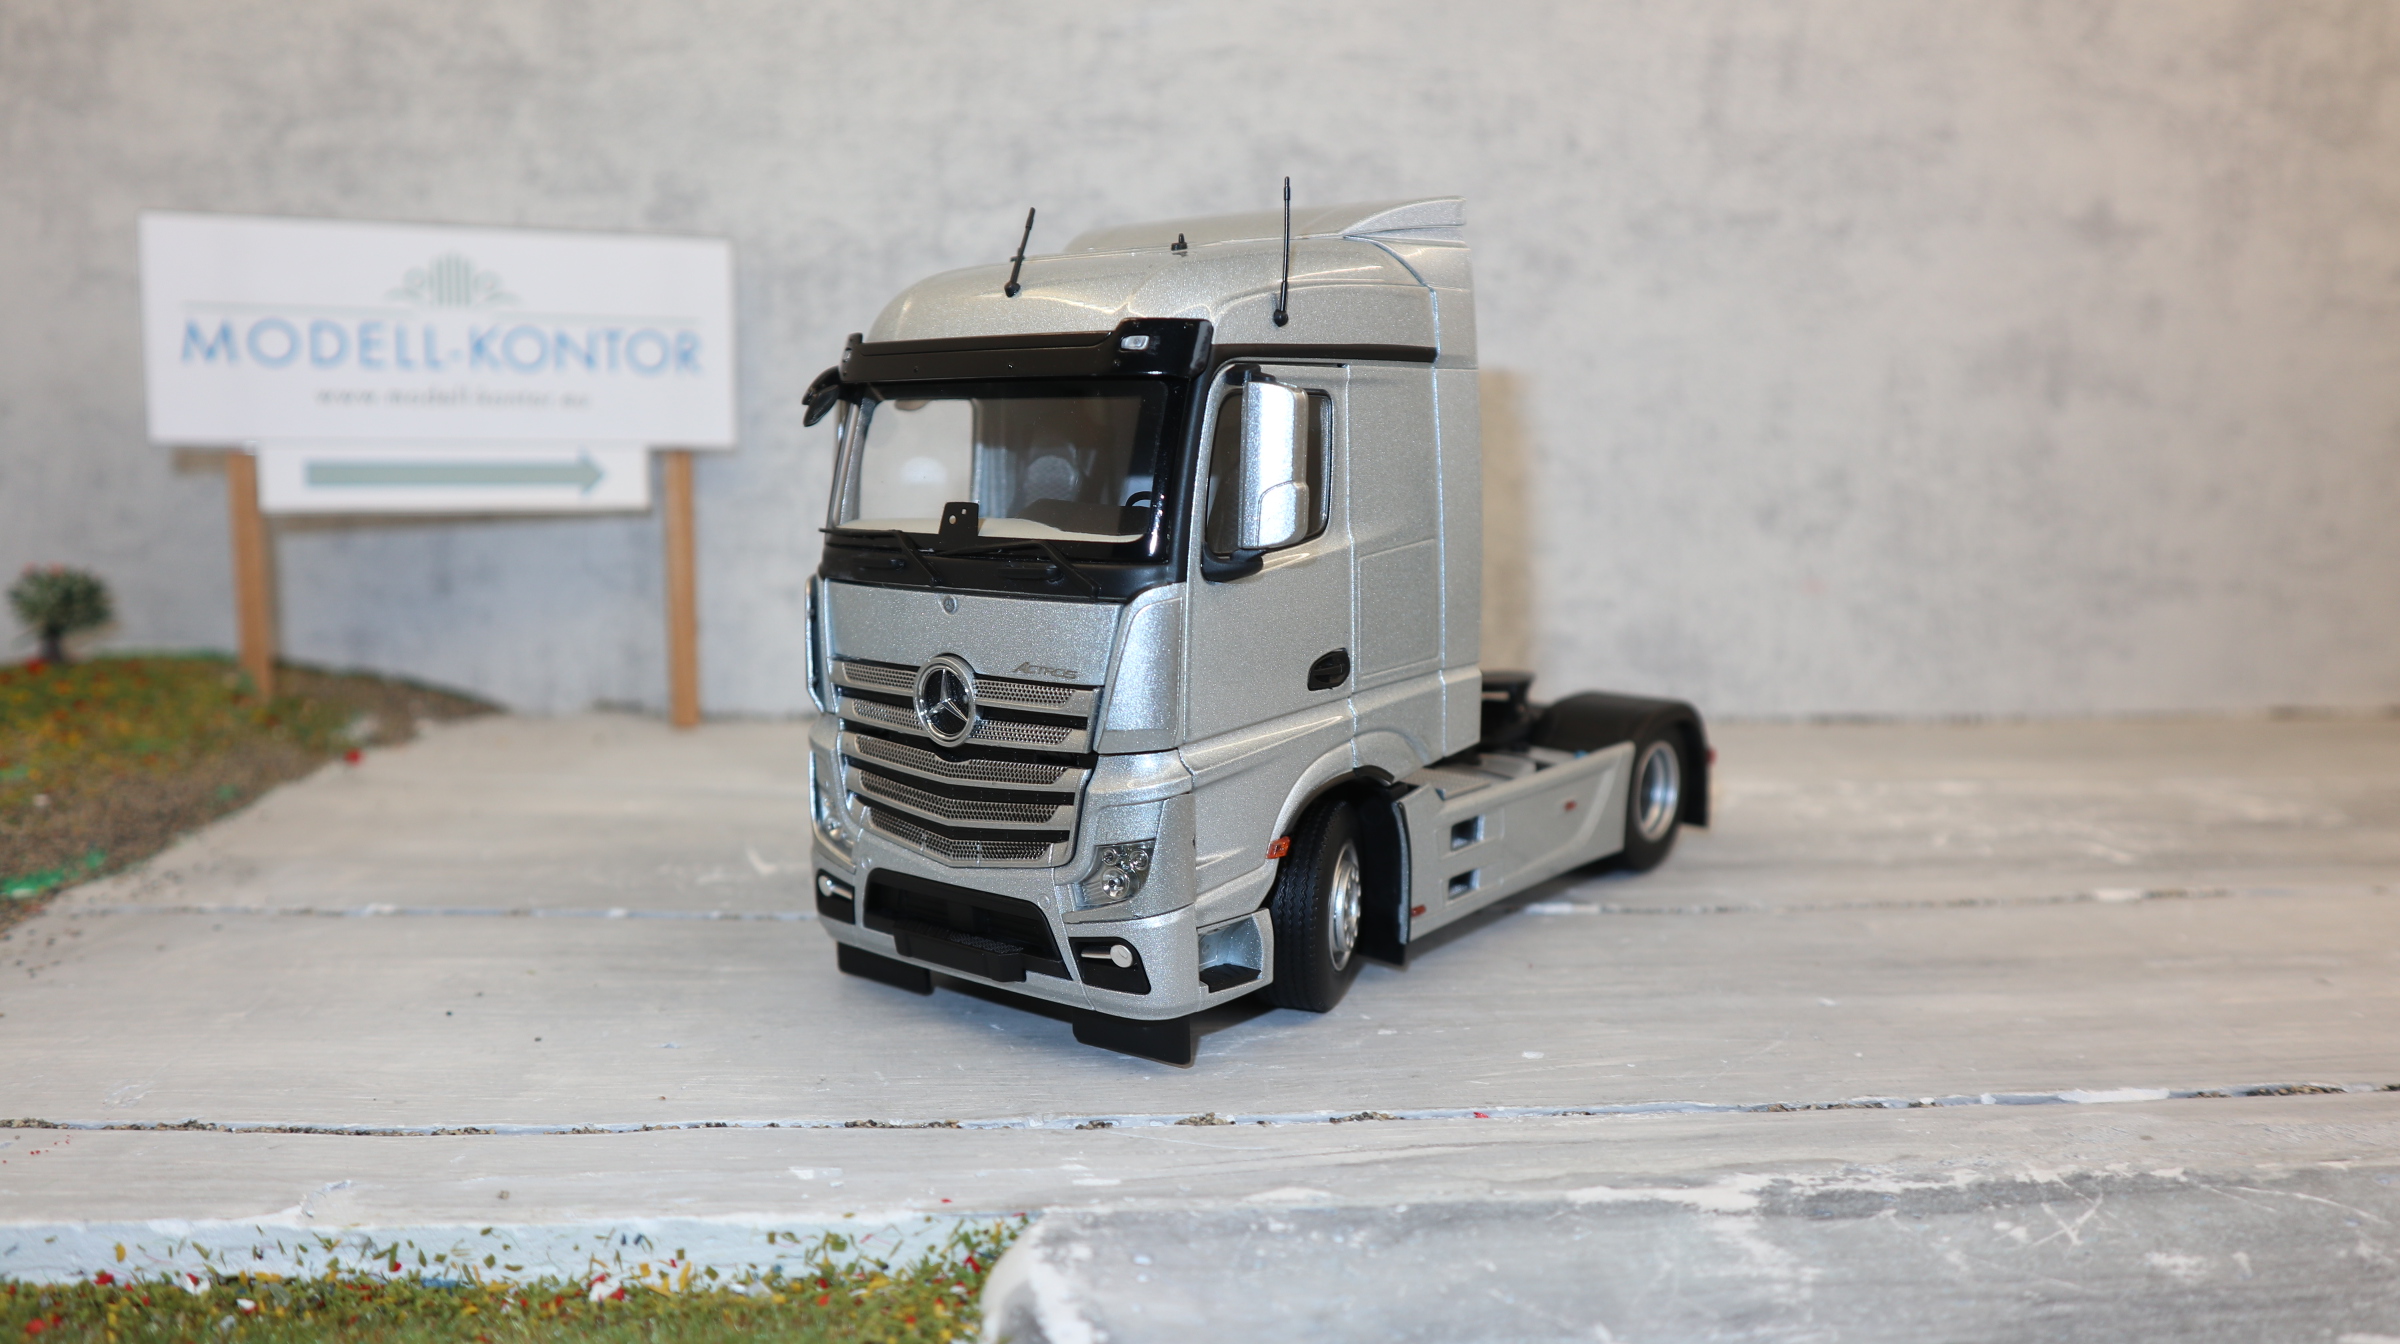 MarGe 1907-03 in 1:32,Mercedes-Benz Actros Streamspace 4x2 in silber als SZM, NEU in OVP